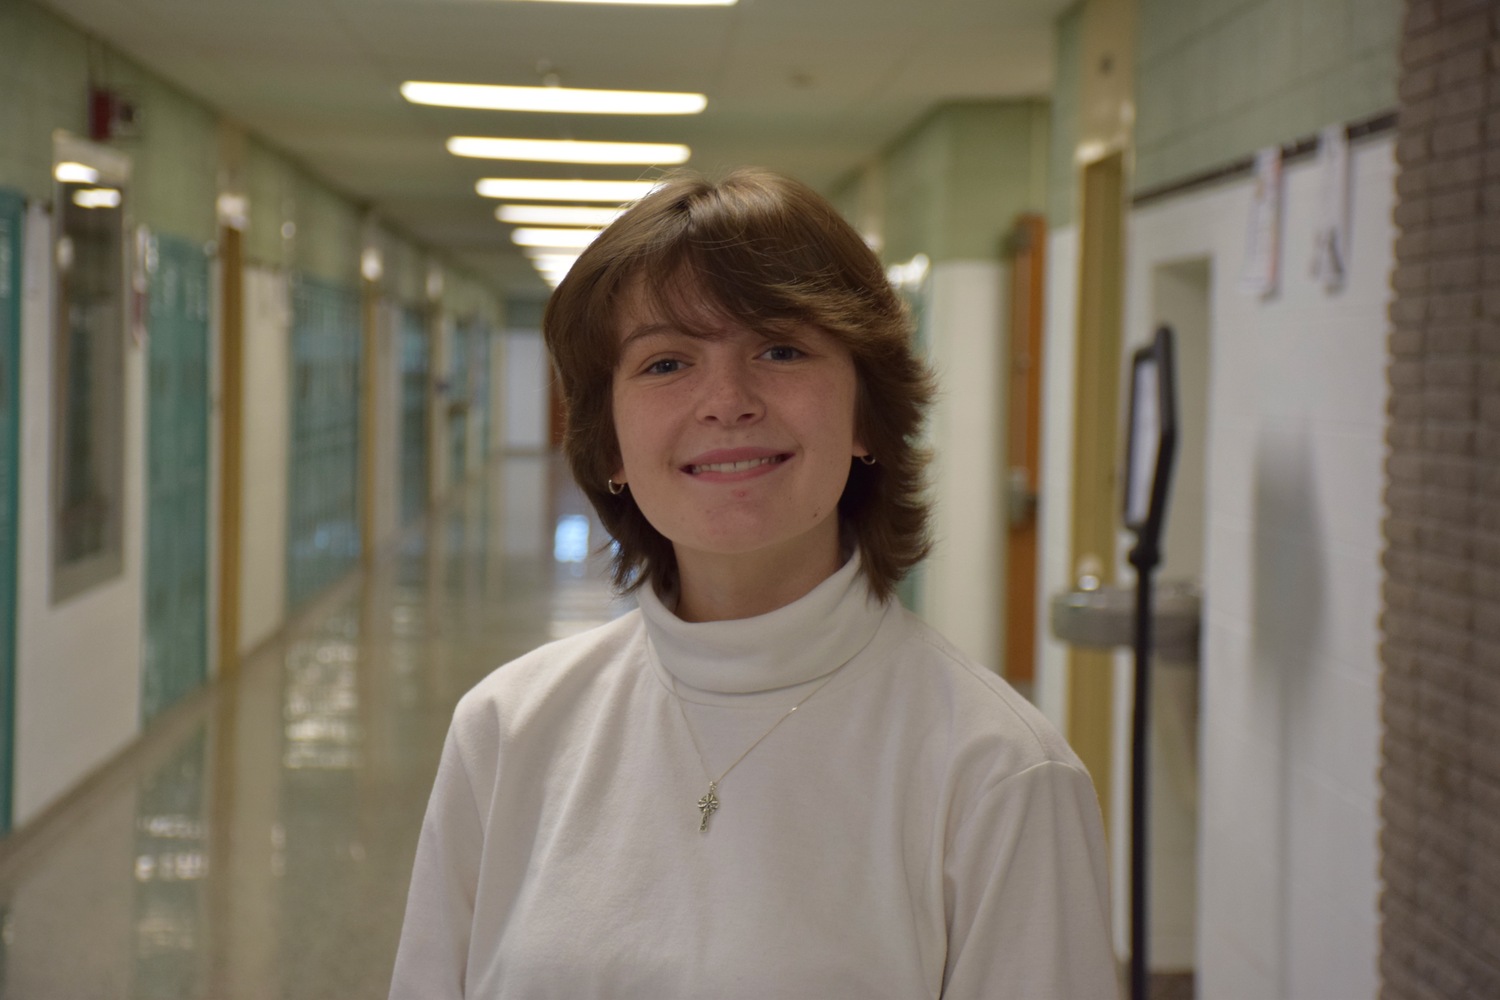 Westhampton Beach High School junior Megan Pomroy earned a perfect score on her 2023 PSAT. COURTESY WESTHAMPTON BEACH SCHOOL DISTRICT